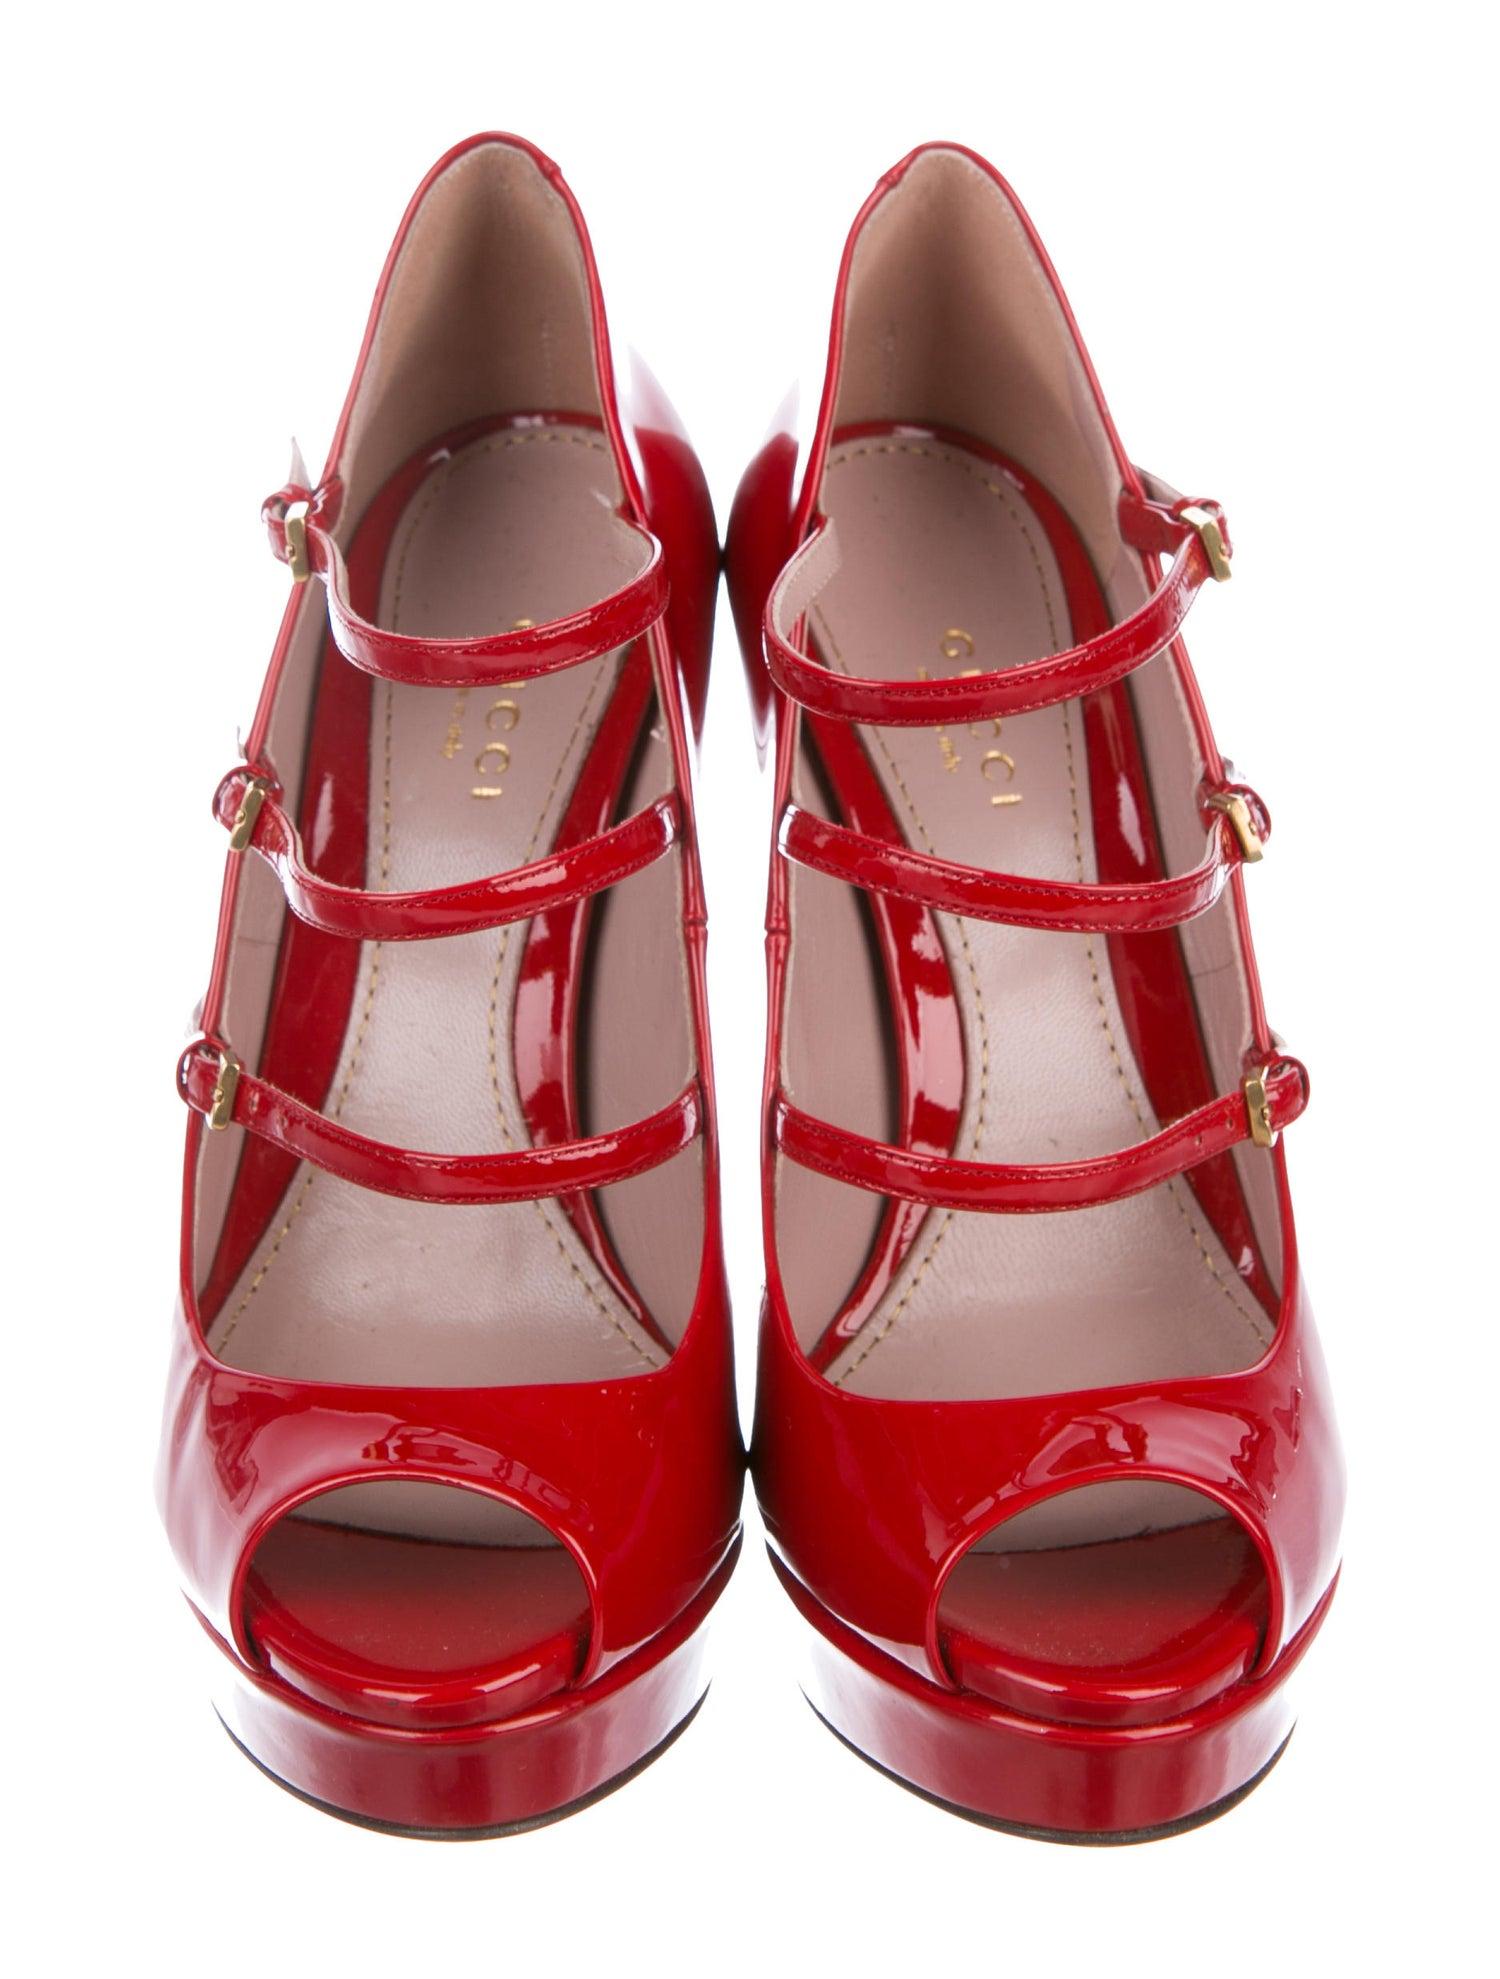 Brand New
Stunning Gucci Patent Leather Heels
Cherry Red Extra Shine Patent
Size: 36.5
Heel 4.25